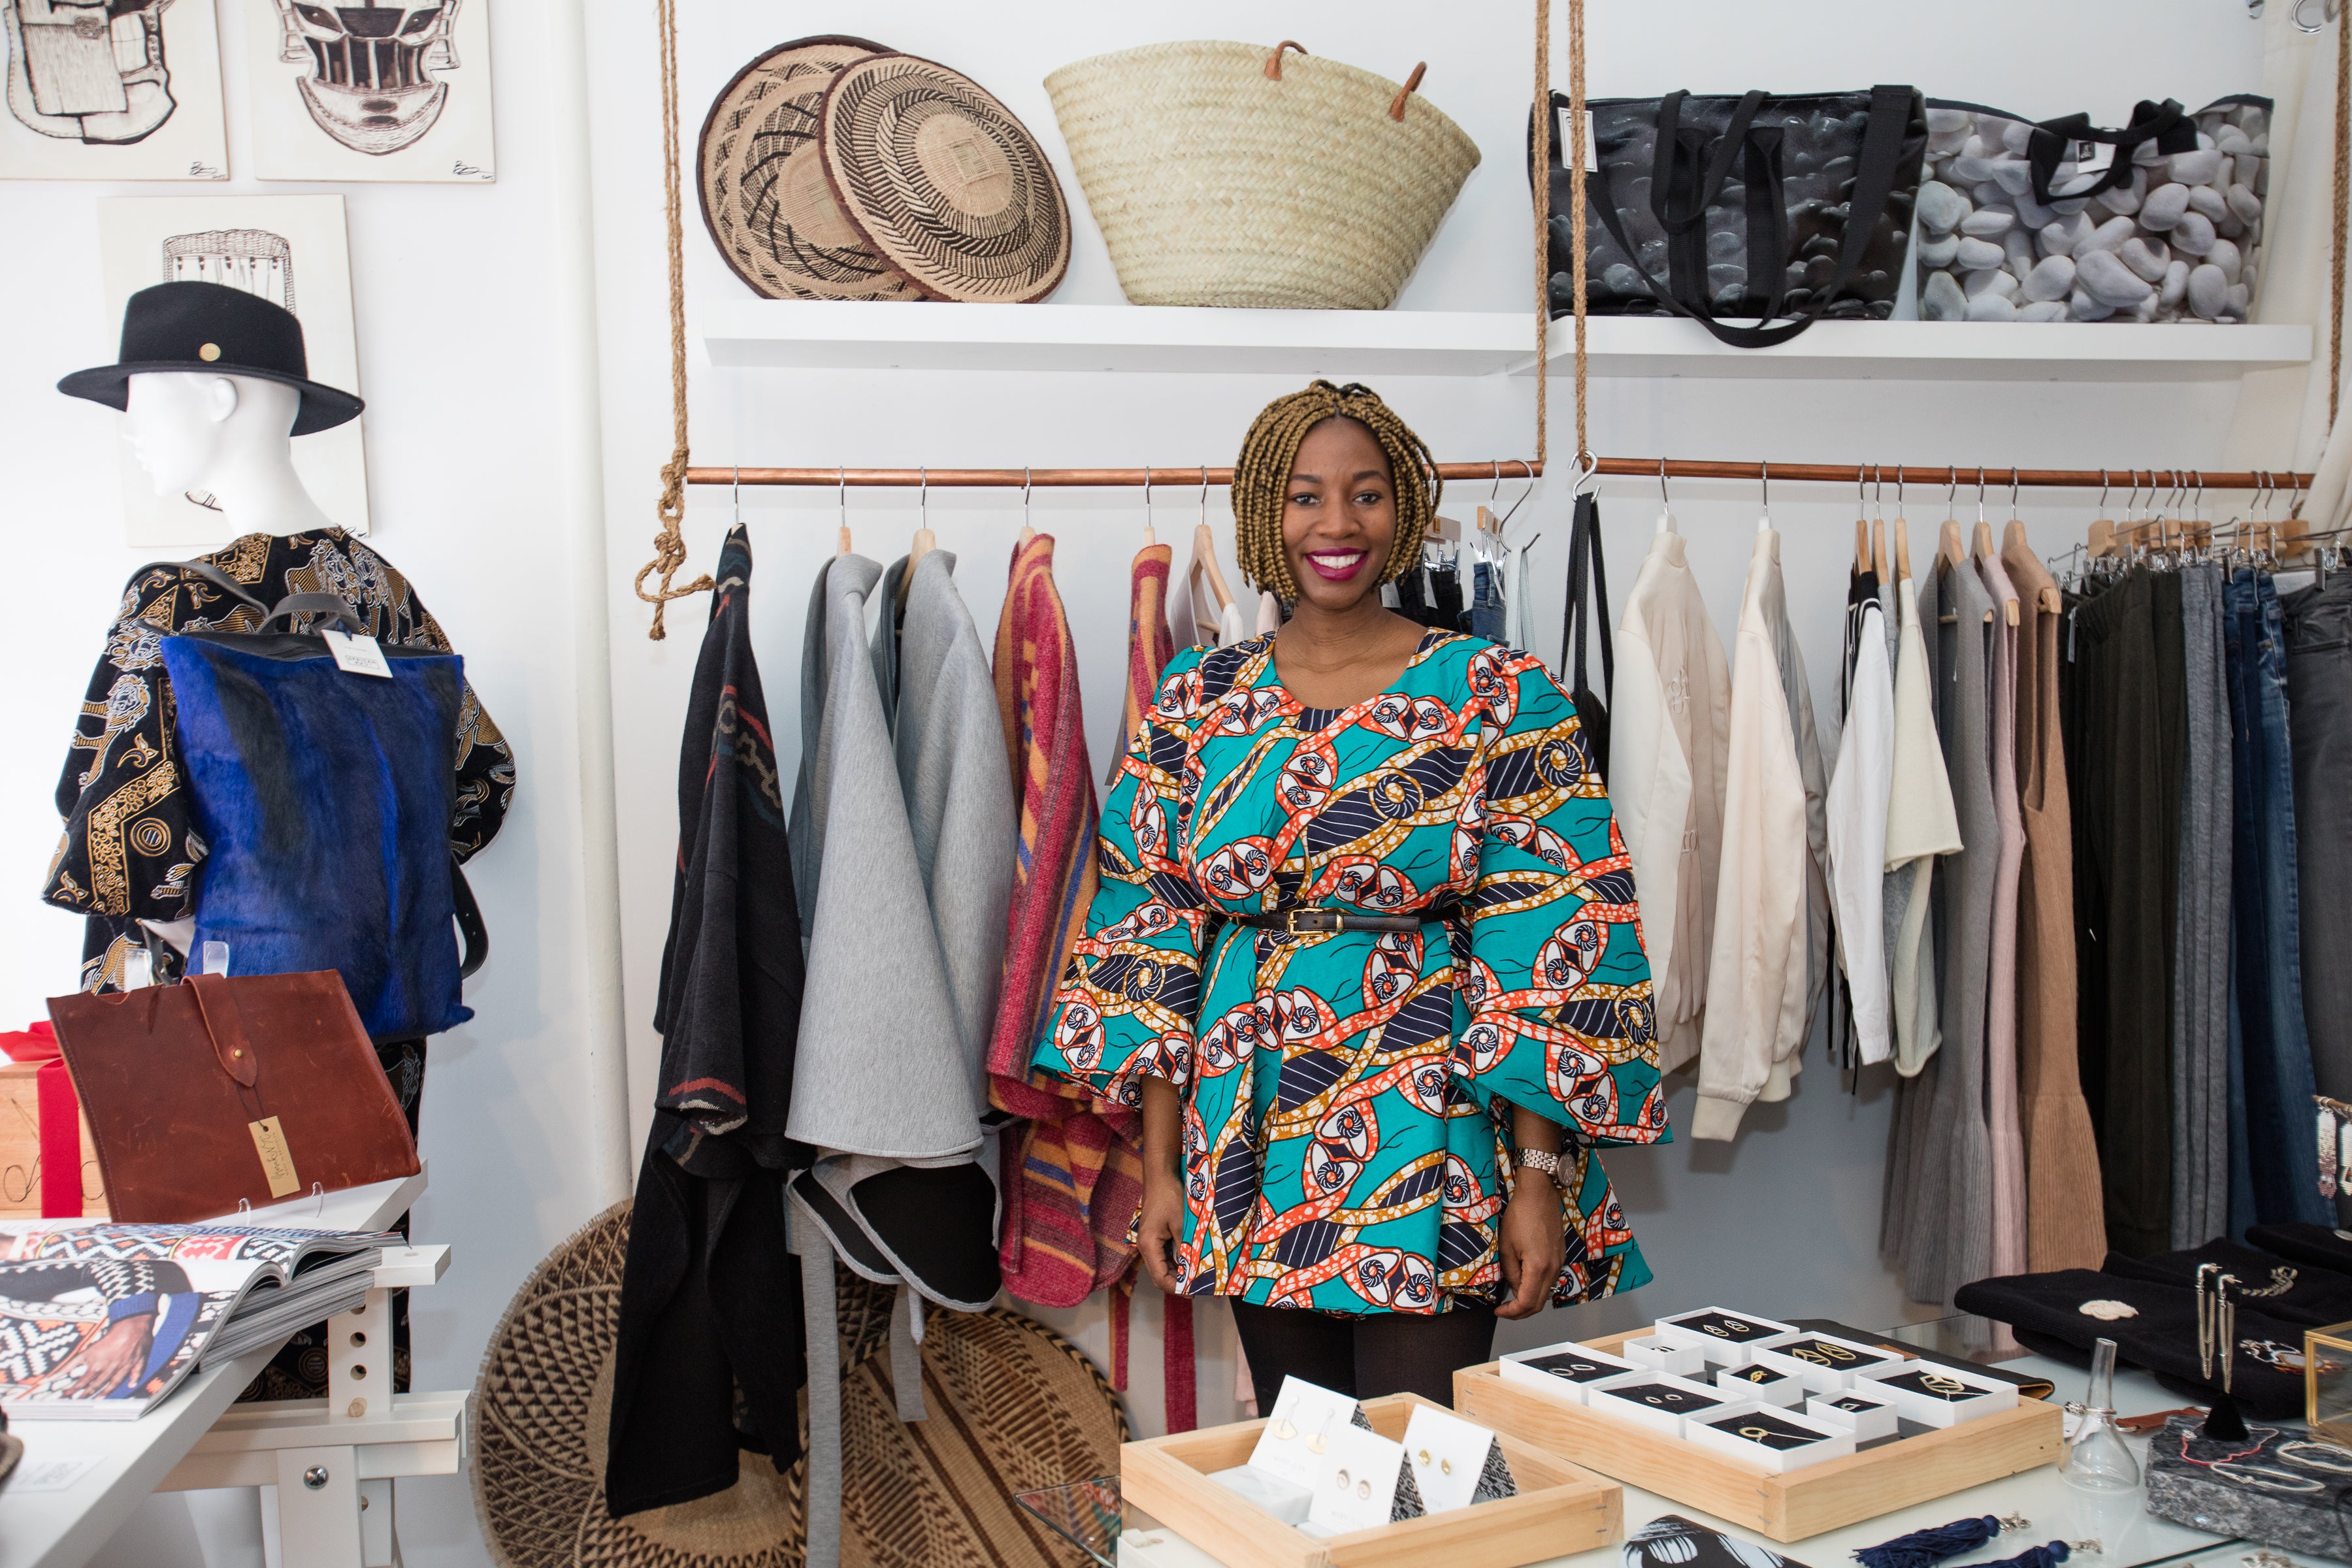 This Brooklyn Entrepreneur Opened A Boutique Spotlighting Designers From The Diaspora
